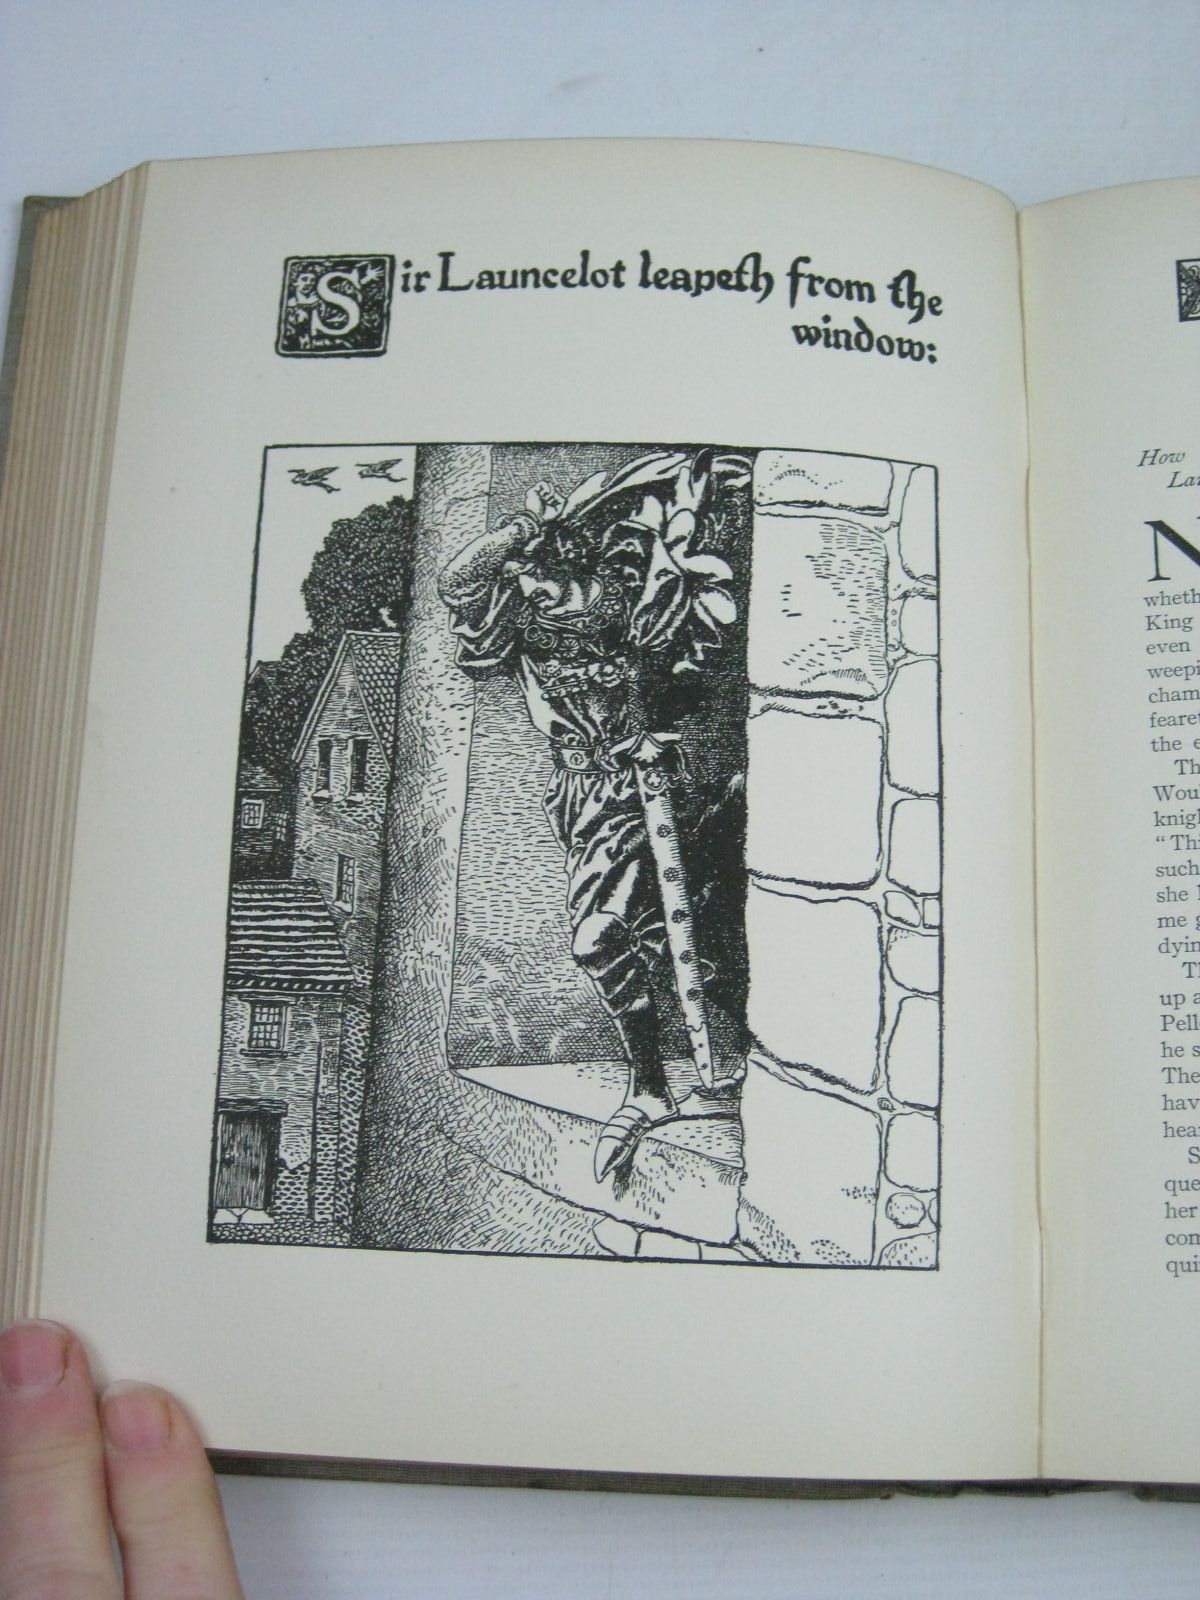 Photo of THE STORY OF SIR LANCELOT AND HIS COMPANIONS written by Pyle, Howard illustrated by Pyle, Howard published by Chapman & Hall Ltd (STOCK CODE: 1314826)  for sale by Stella & Rose's Books